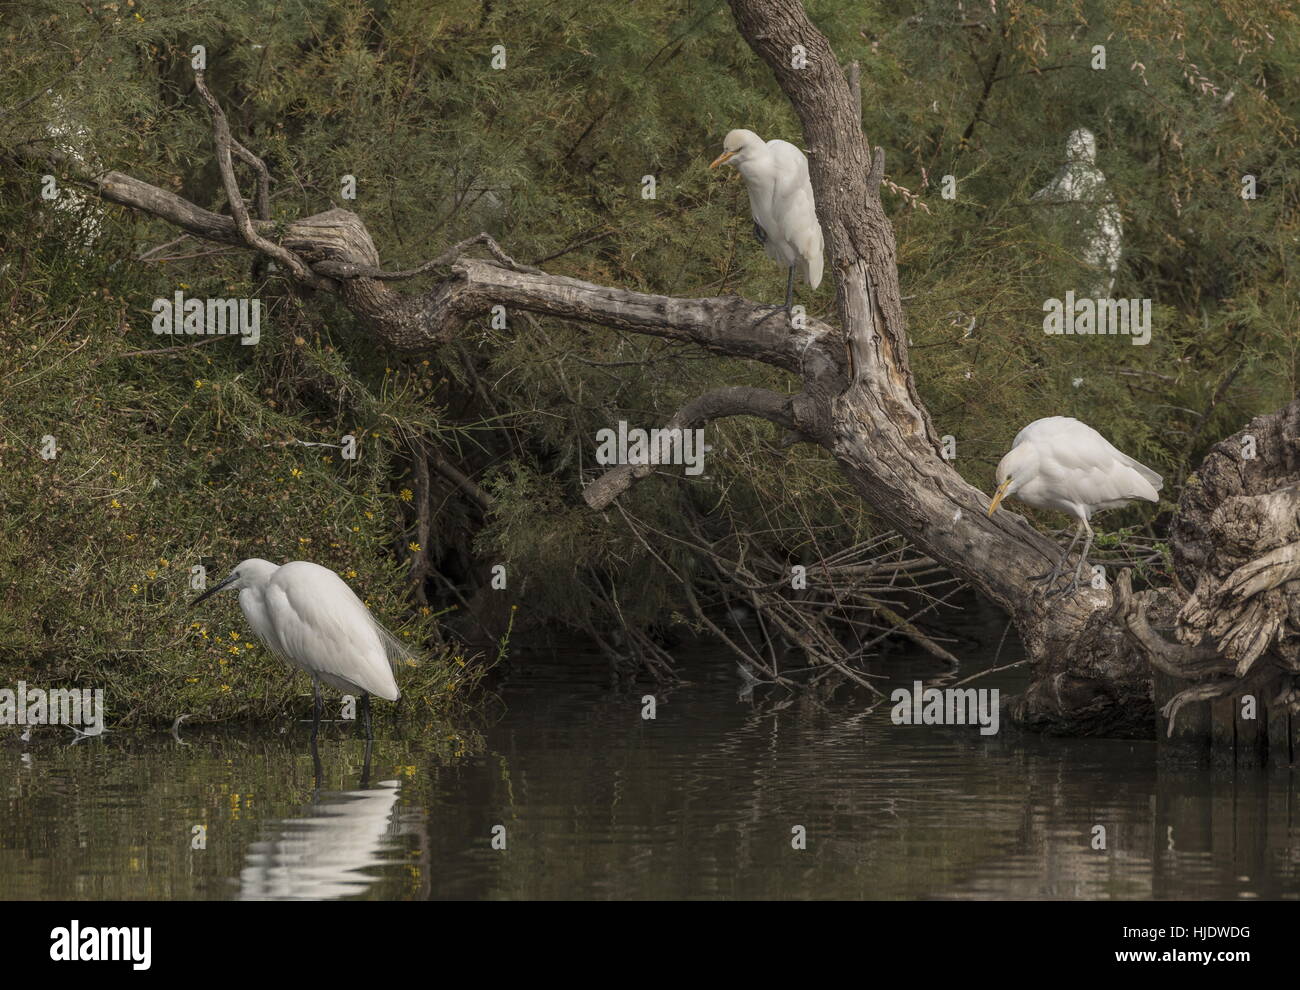 Cattle Egrets, Bubulcus ibis and Little Egret, fishing from tree, Camargue. Stock Photo